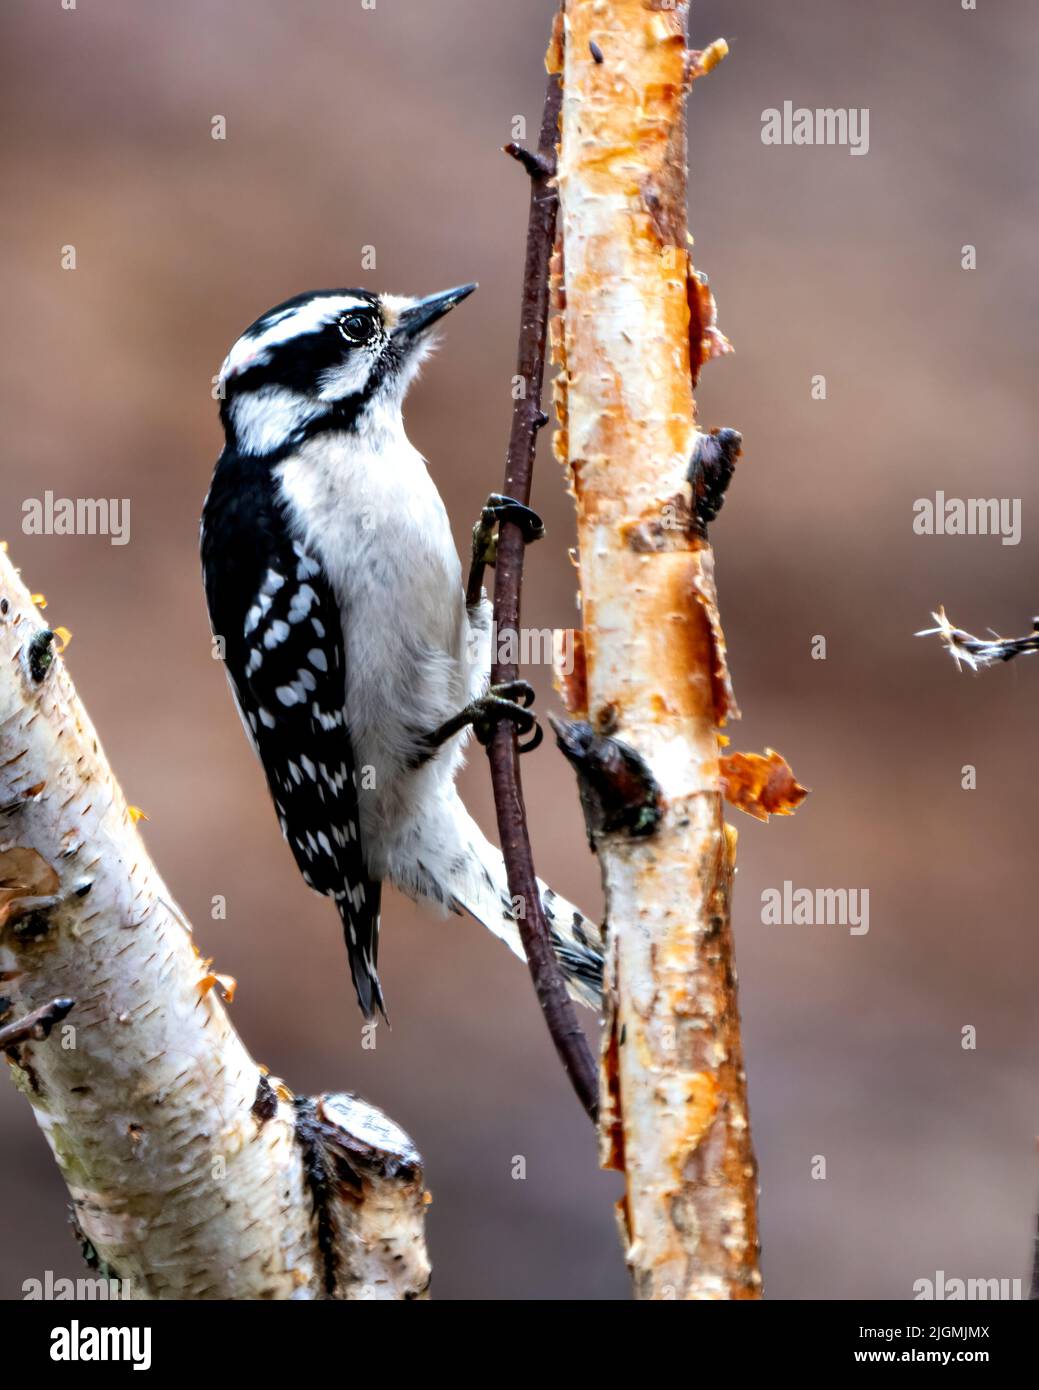 Woodpecker female close-up profile view perched on a tree branch with blur background in its environment and habitat. Image. Picture. Portrait. Stock Photo